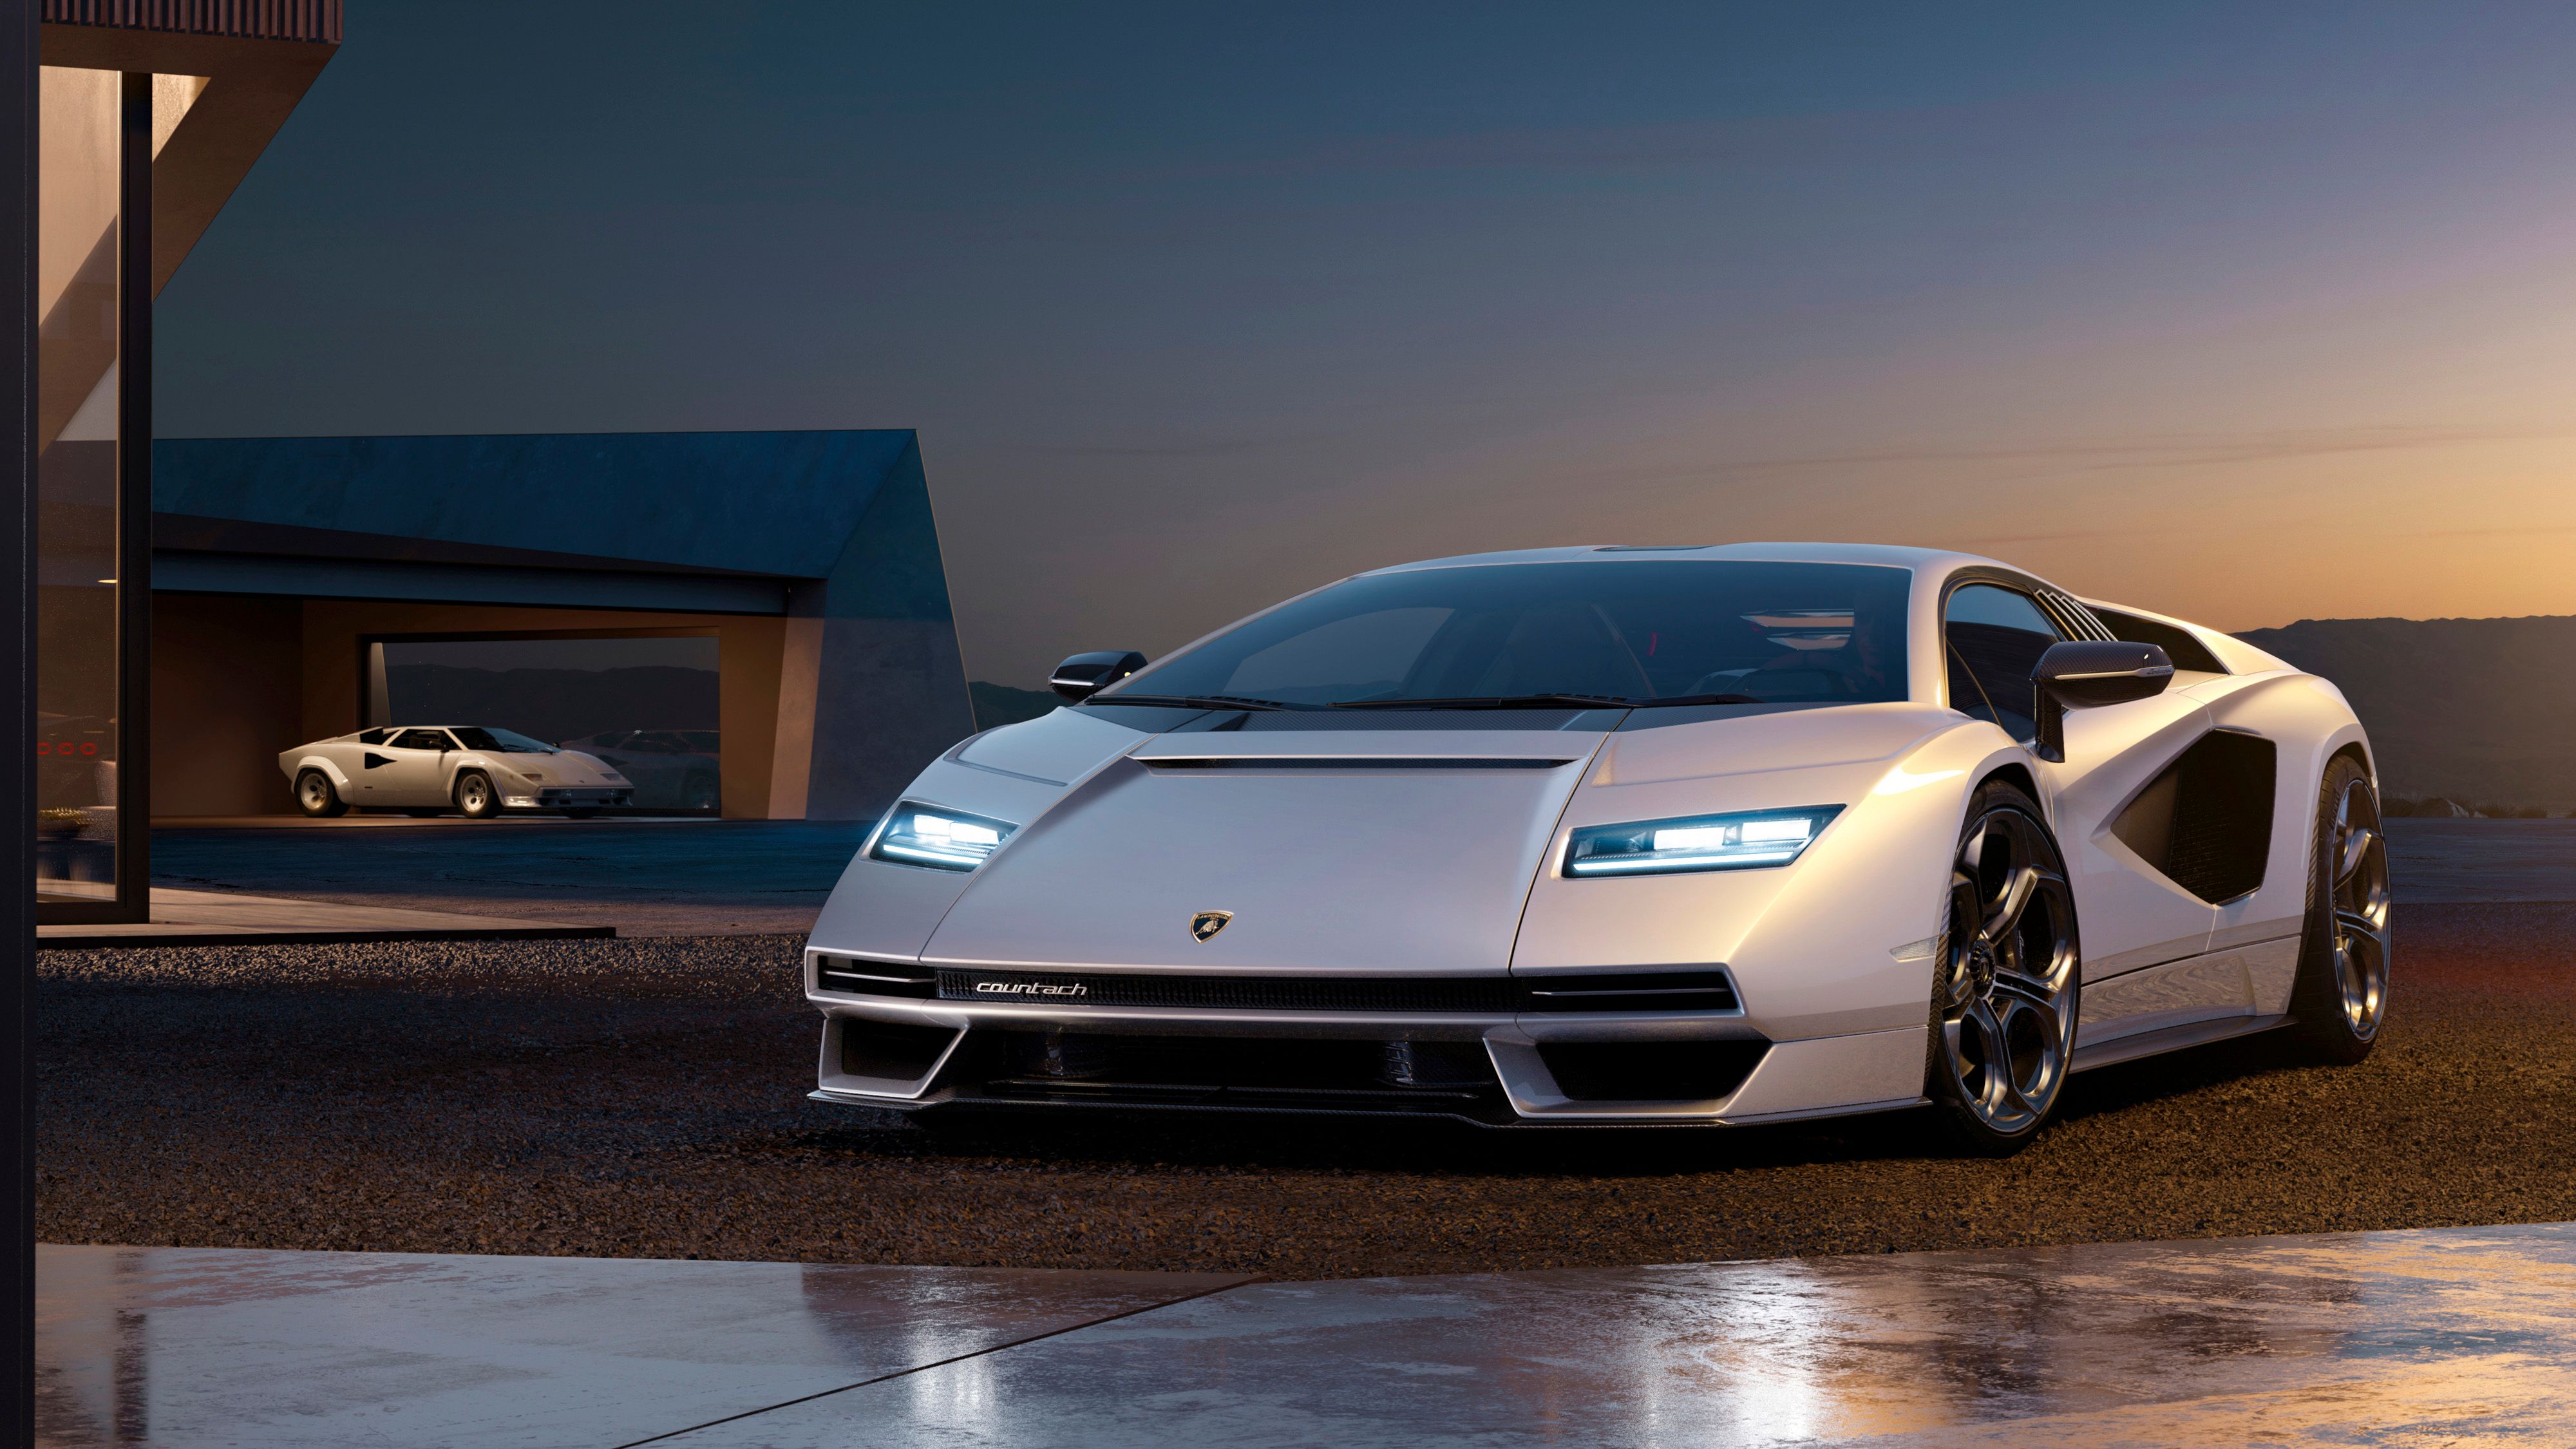 2022 Lamborghini Is Not Interested In Making More Retro Models And It's a Shame 